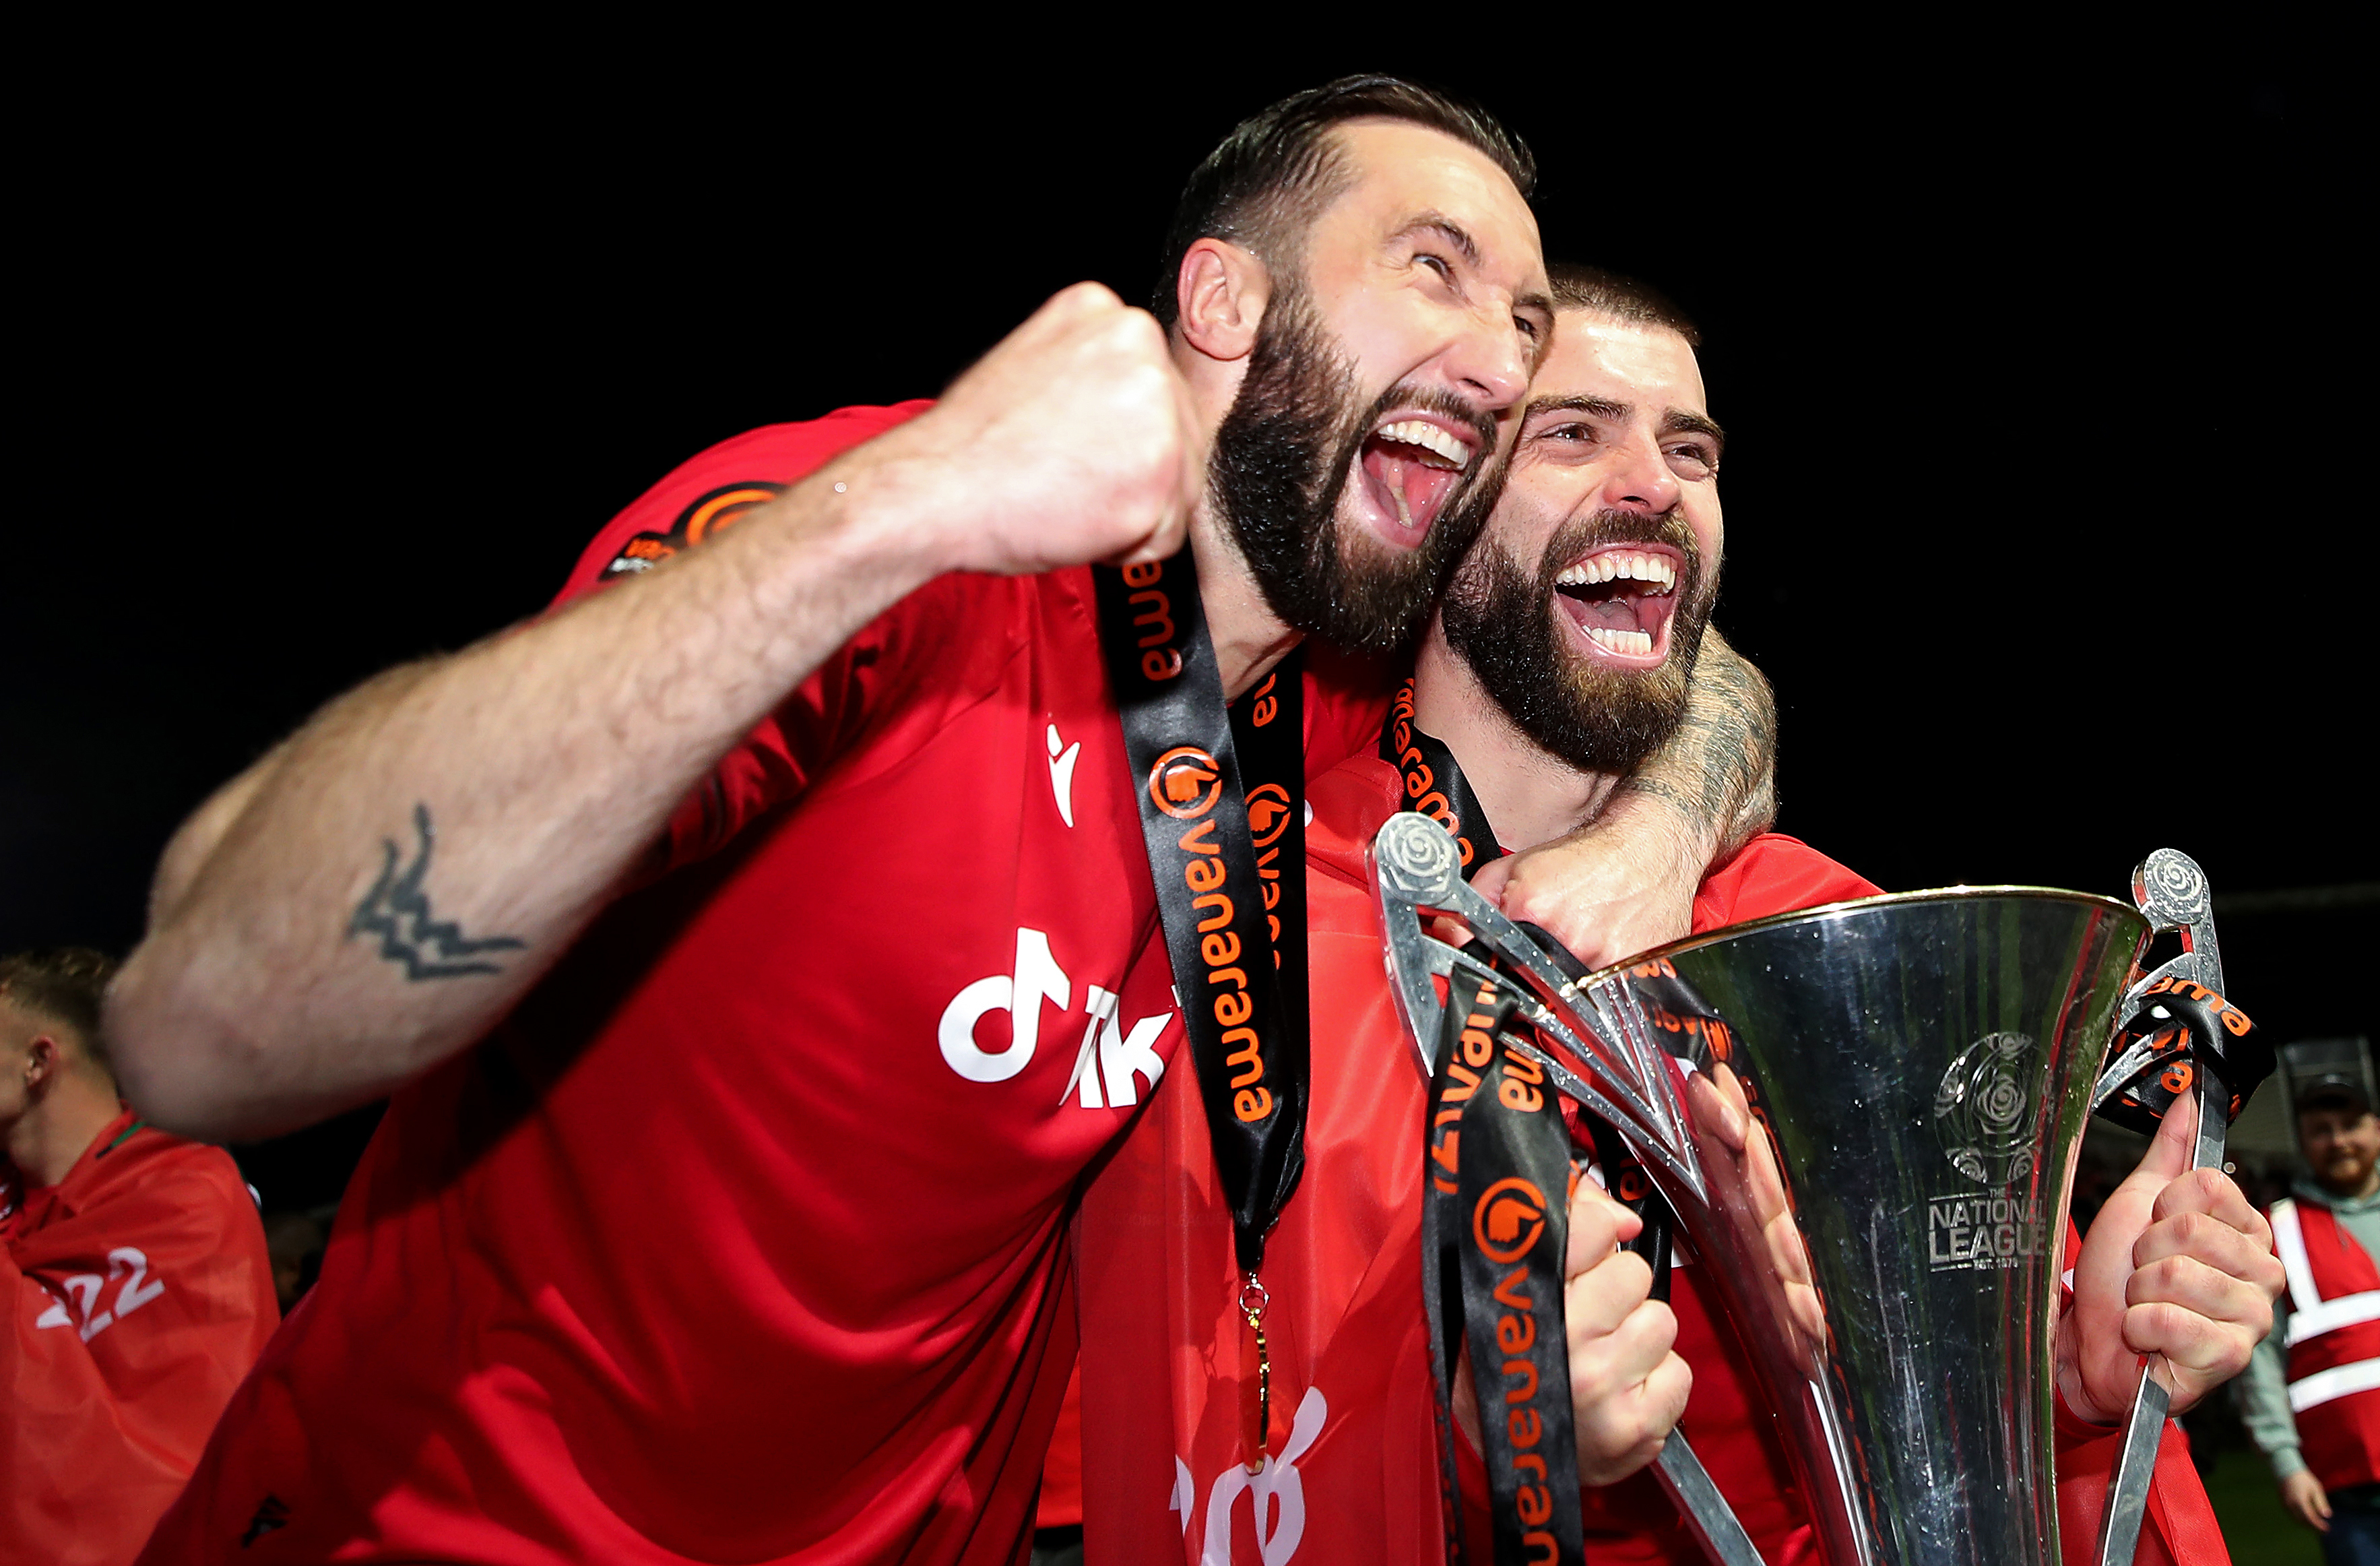  Ollie Palmer and Elliot Lee of Wrexham celebrate with the Vanarama National League trophy as Wrexham win the Vanarama National League and are promoted to the English Football League after victory in the Vanarama National League match between Wrexham and Boreham Wood at Racecourse Ground on April 22, 2023 in Wrexham, Wales. (Photo by Jan Kruger/Getty Images)